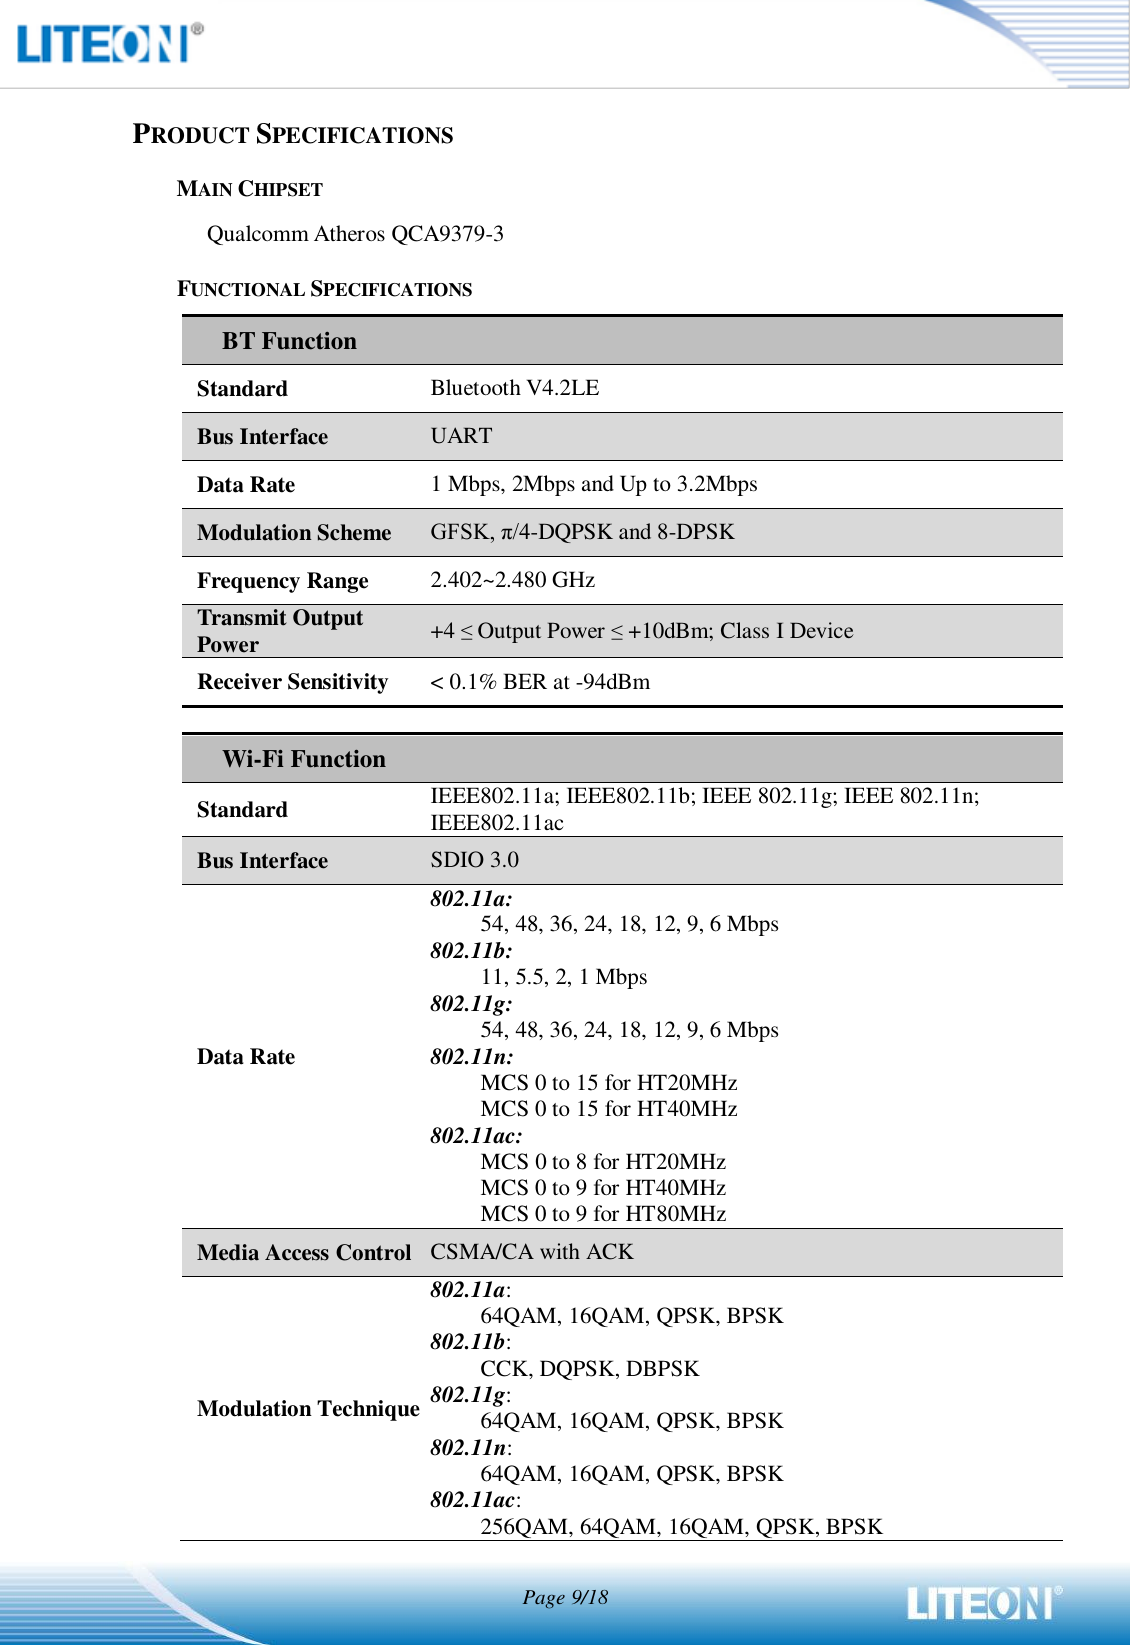  Page 9/18   PRODUCT SPECIFICATIONS MAIN CHIPSET Qualcomm Atheros QCA9379-3 FUNCTIONAL SPECIFICATIONS    BT Function Standard Bluetooth V4.2LE Bus Interface UART Data Rate 1 Mbps, 2Mbps and Up to 3.2Mbps Modulation Scheme GFSK, π/4-DQPSK and 8-DPSK Frequency Range 2.402~2.480 GHz Transmit Output Power +4 ≤ Output Power ≤ +10dBm; Class I Device Receiver Sensitivity &lt; 0.1% BER at -94dBm   Wi-Fi Function Standard   IEEE802.11a; IEEE802.11b; IEEE 802.11g; IEEE 802.11n; IEEE802.11ac Bus Interface SDIO 3.0 Data Rate 802.11a: 54, 48, 36, 24, 18, 12, 9, 6 Mbps 802.11b: 11, 5.5, 2, 1 Mbps 802.11g: 54, 48, 36, 24, 18, 12, 9, 6 Mbps 802.11n: MCS 0 to 15 for HT20MHz MCS 0 to 15 for HT40MHz 802.11ac: MCS 0 to 8 for HT20MHz MCS 0 to 9 for HT40MHz MCS 0 to 9 for HT80MHz Media Access Control CSMA/CA with ACK Modulation Technique 802.11a: 64QAM, 16QAM, QPSK, BPSK 802.11b: CCK, DQPSK, DBPSK 802.11g: 64QAM, 16QAM, QPSK, BPSK 802.11n: 64QAM, 16QAM, QPSK, BPSK 802.11ac: 256QAM, 64QAM, 16QAM, QPSK, BPSK 